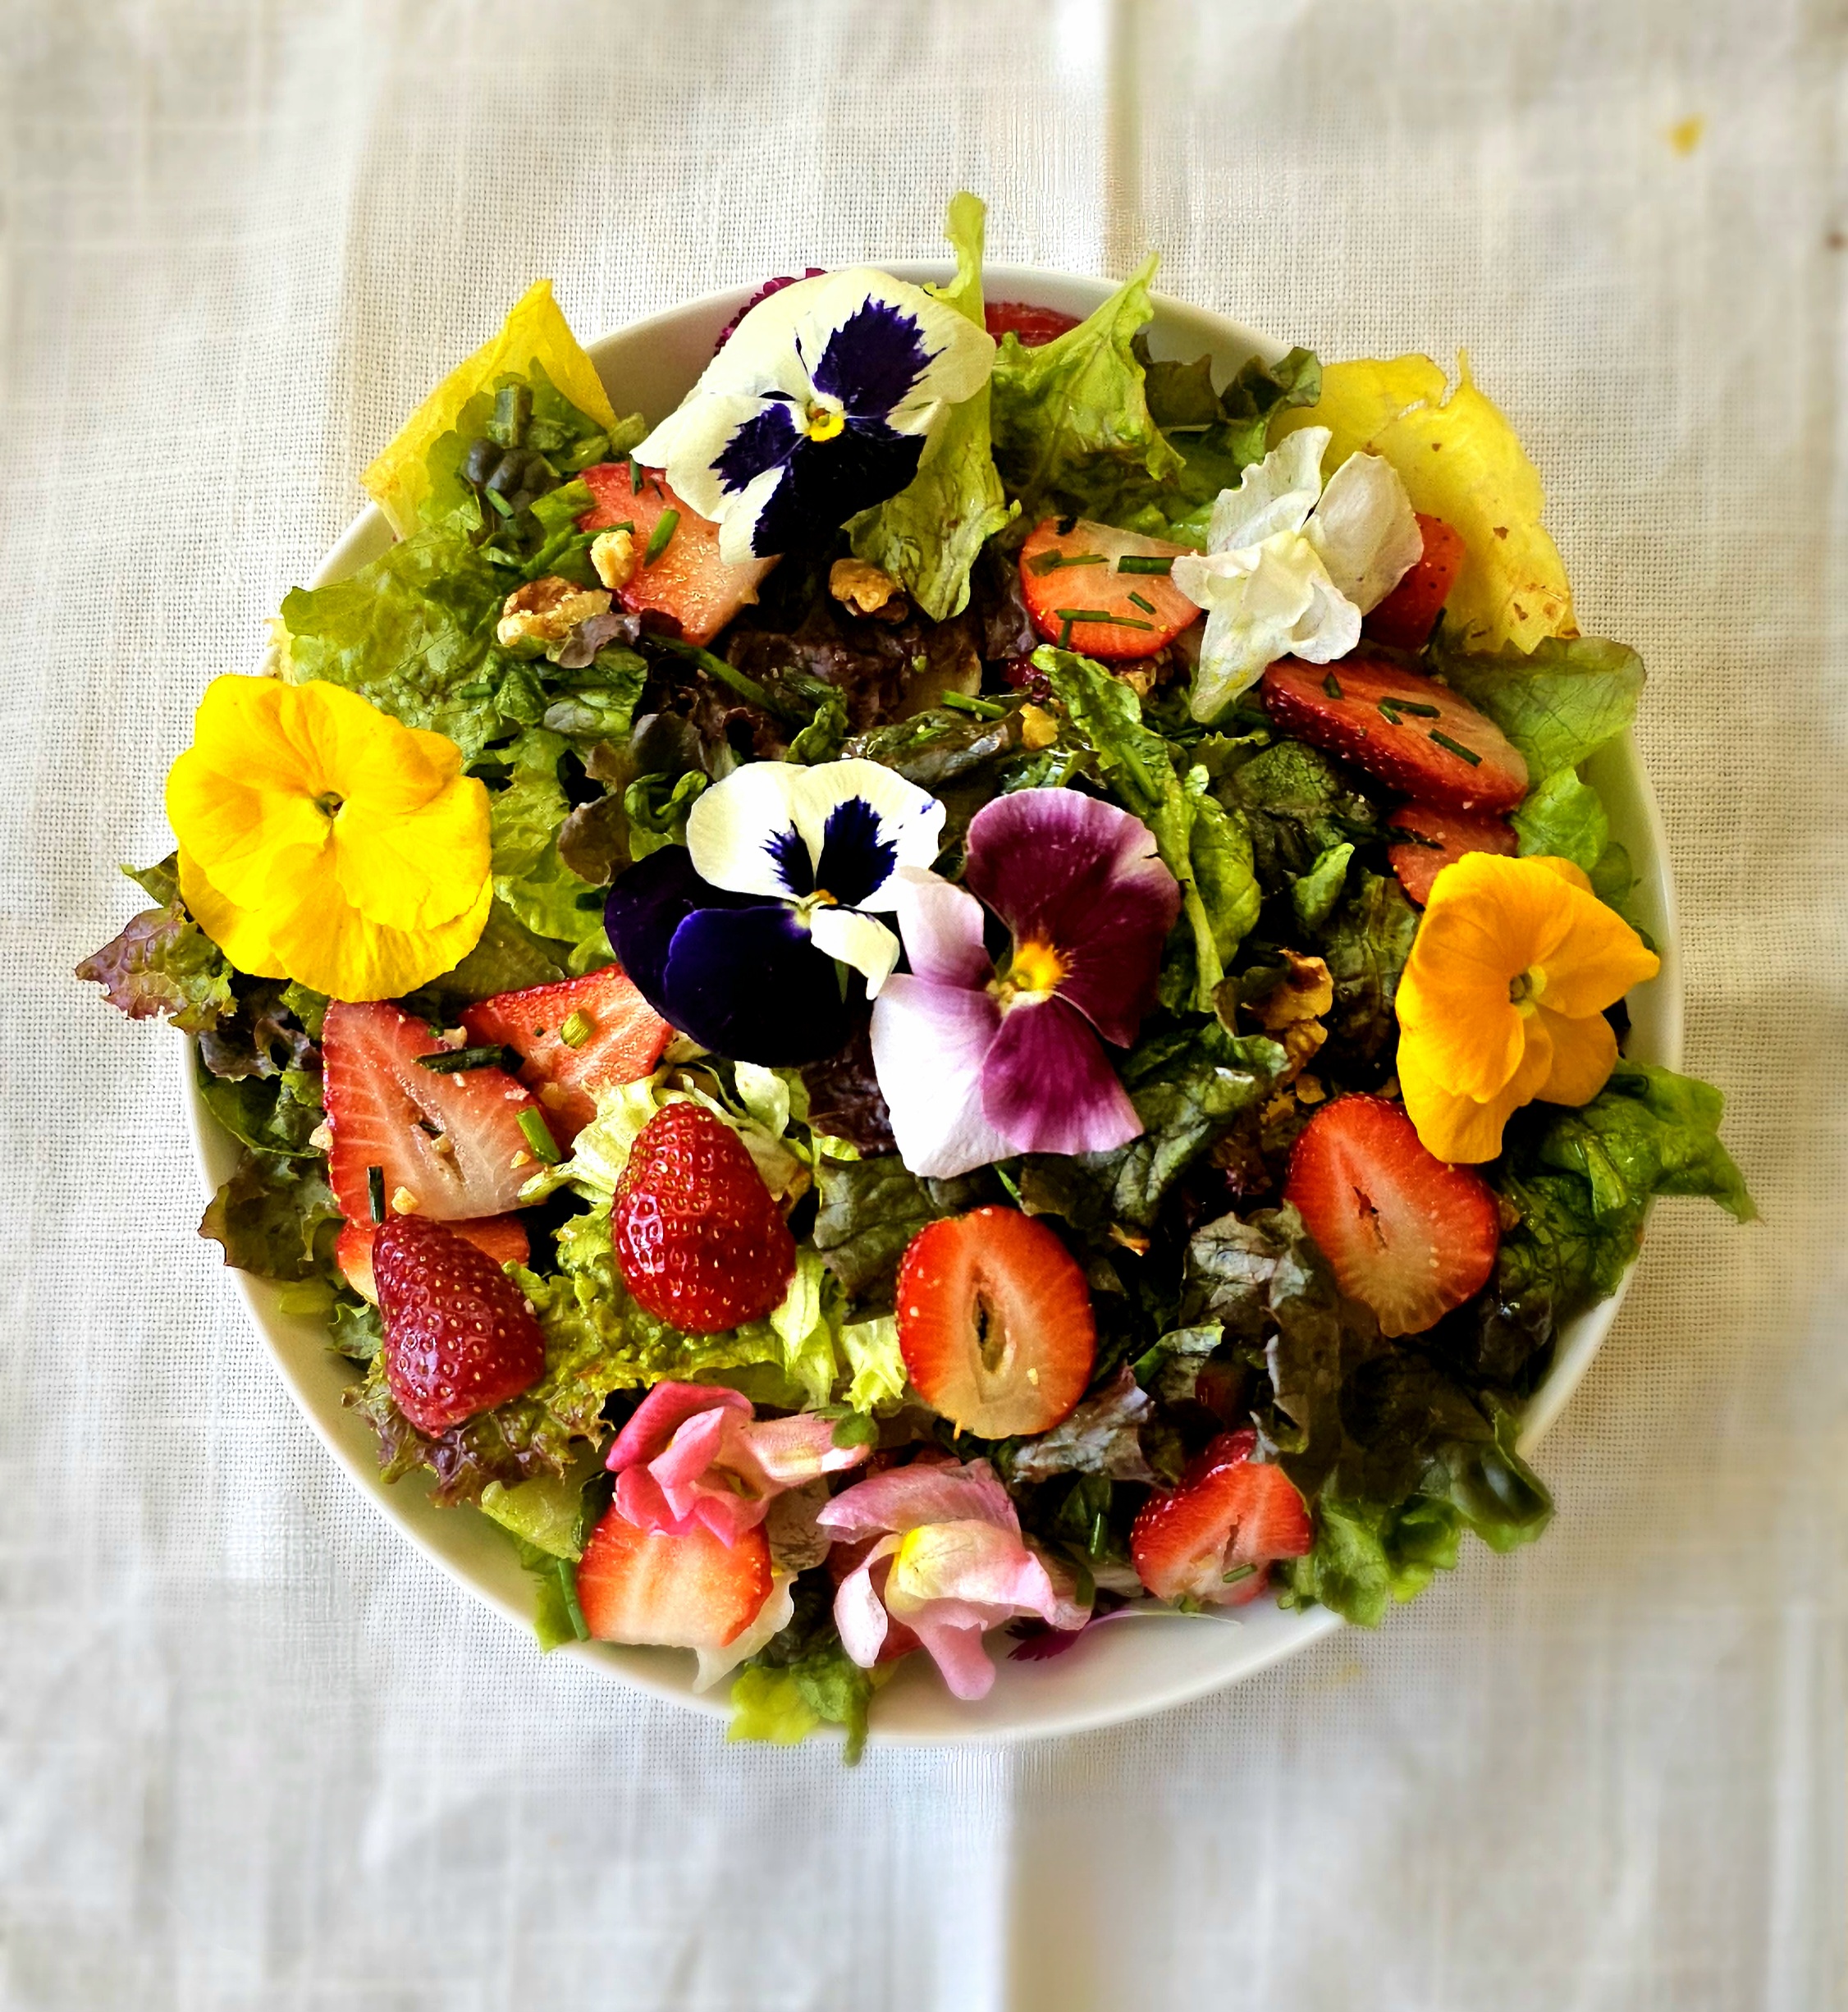 Garden Salad with Strawberries & Edible Flowers first pass